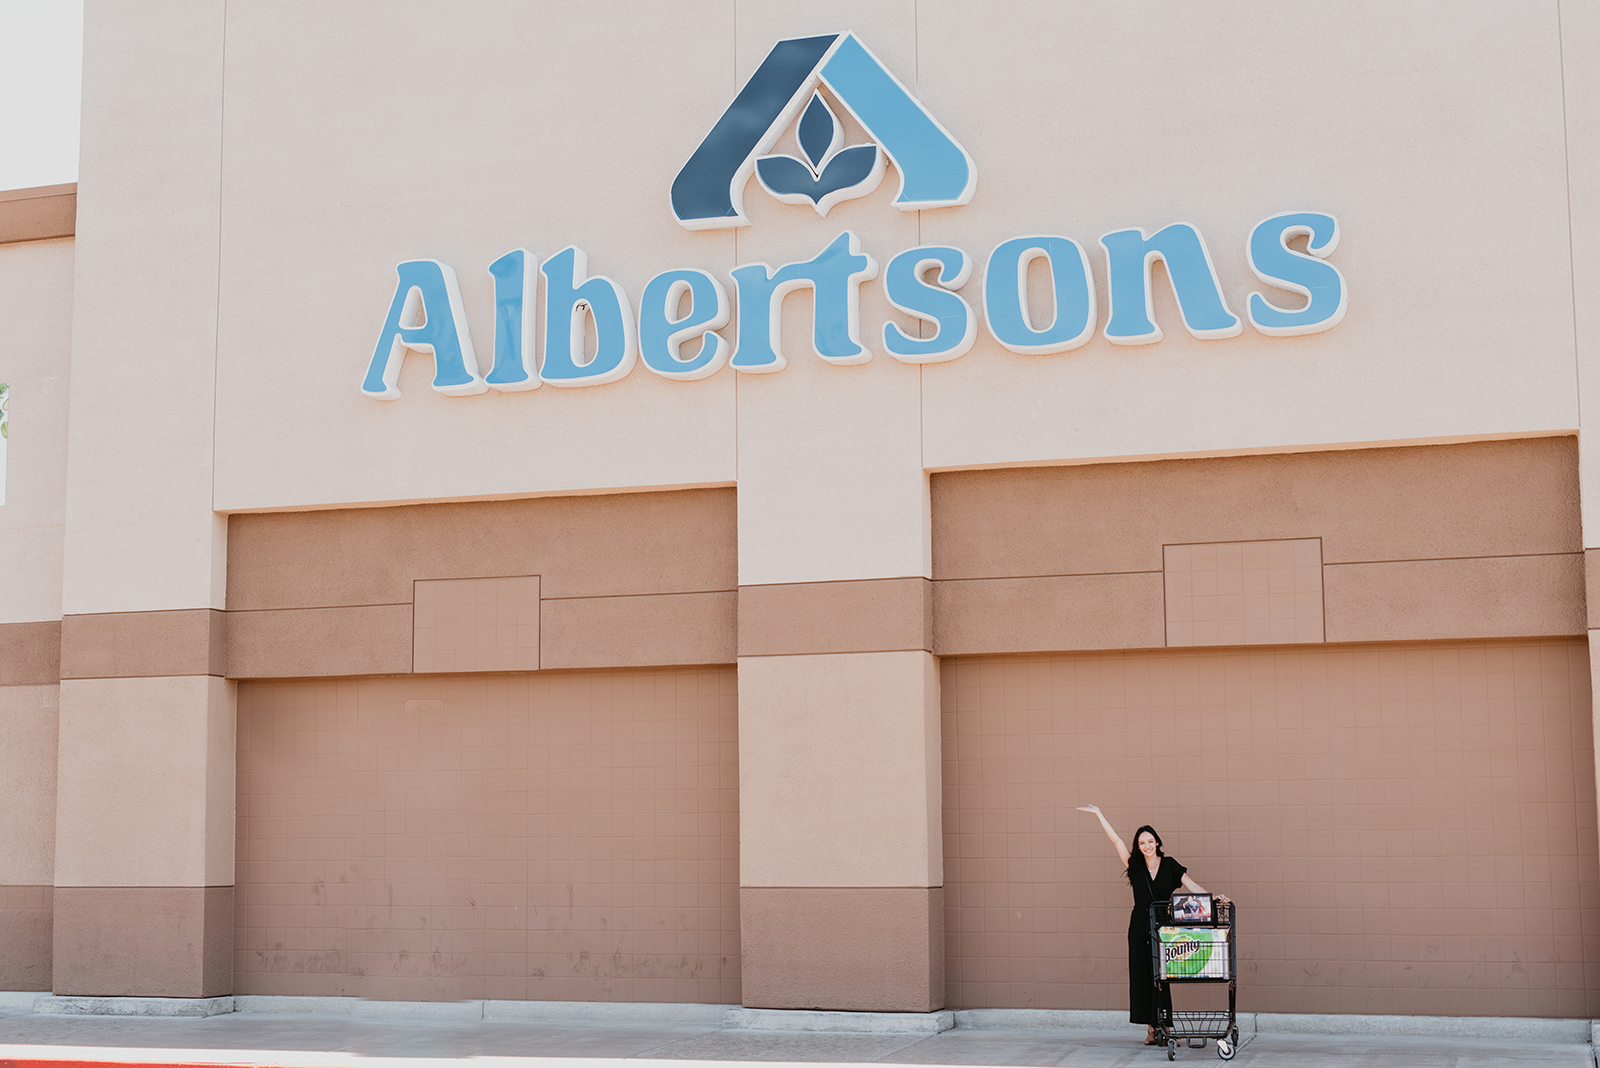 Albertsons sale favorites featured by top Las Vegas lifestyle blog, Outfits & Outings